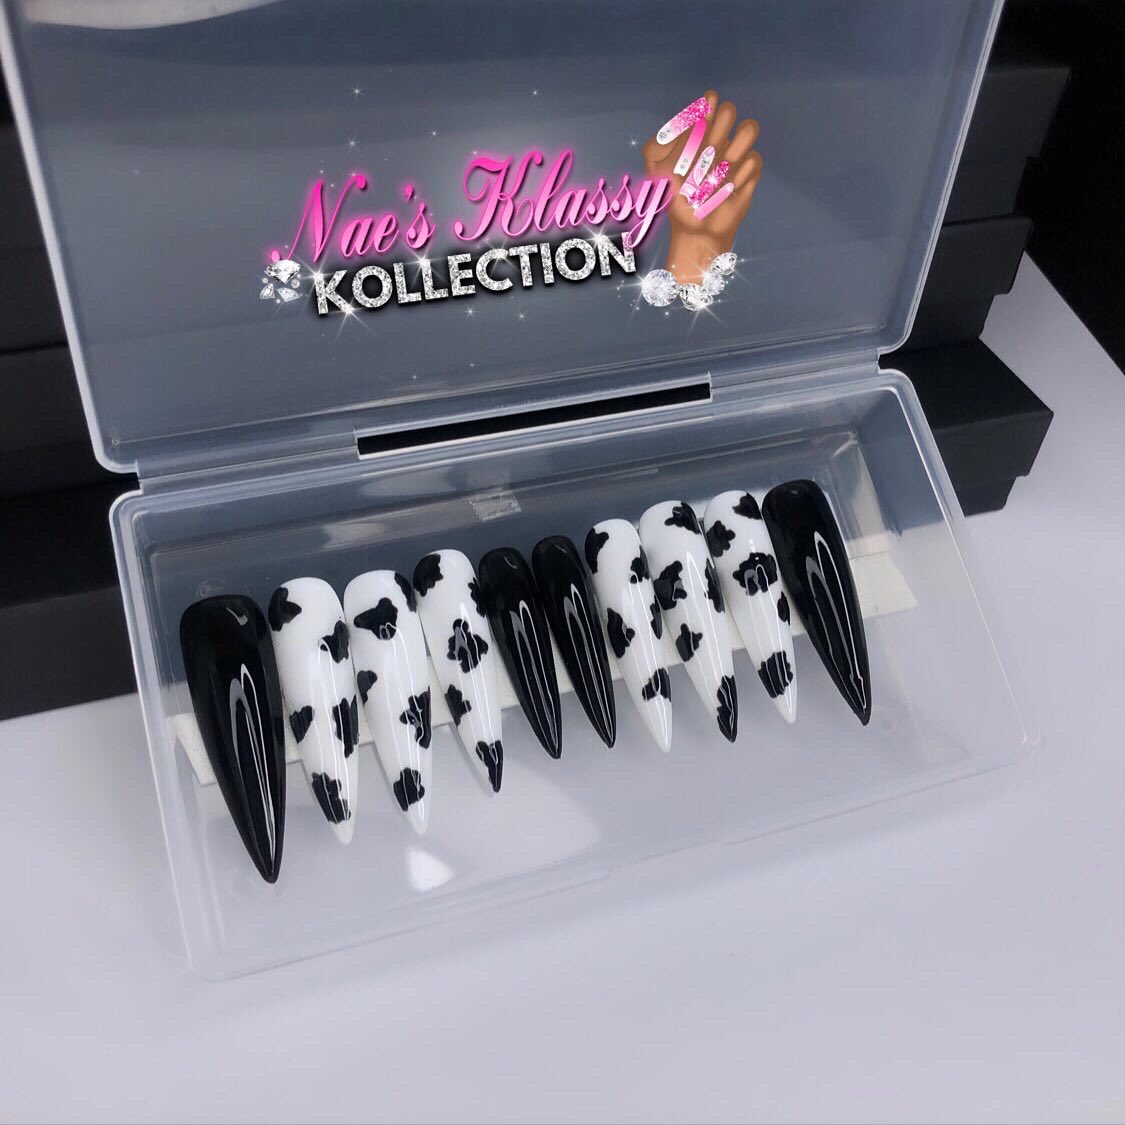 “Cowgirlish” 🐄 Stiletto| Size: XS| now available on website, link in bio to purchase 💕💅🏾!! 
(NaeKlassyKollection.com)
.
.
.

#pressonnails #pressonnailset #pressonnailbusiness #cutepressons #nails #cutenaildesigns #smallbusiness #purplenails #beauty #slay #shopnow #cownails